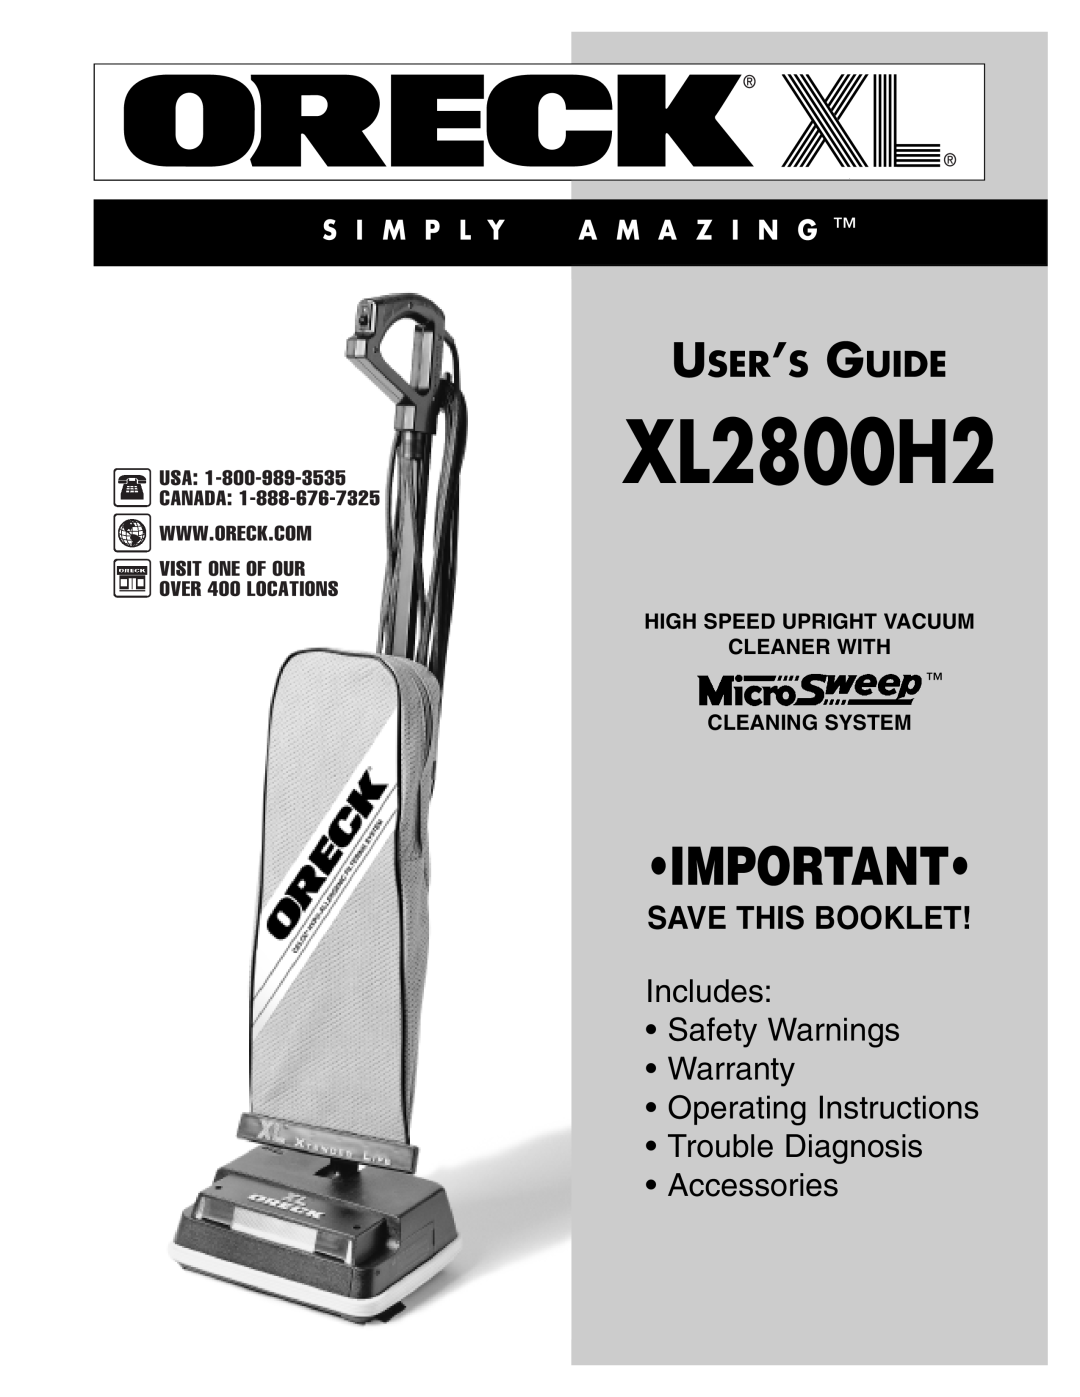 Oreck XL2800H2 warranty User’S Guide, High Speed Upright Vacuum Cleaner With, Cleaning System, Save This Booklet 